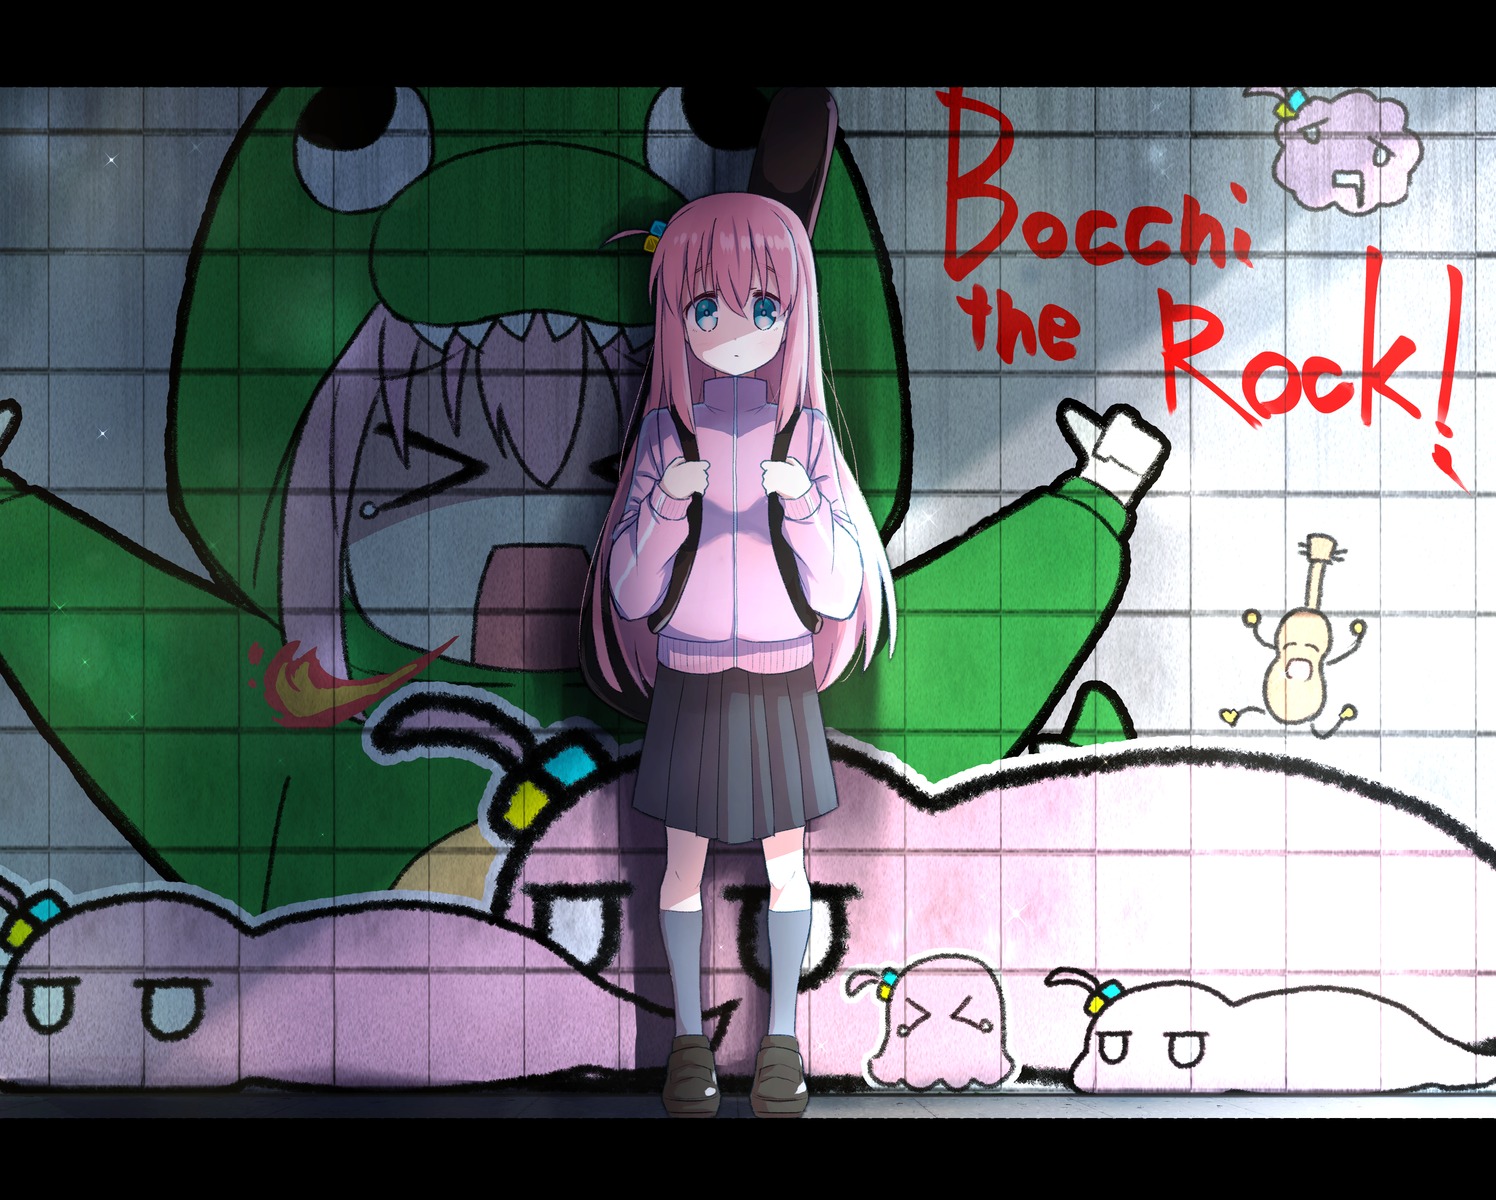 Bocchi the rock! by Domnyy on Newgrounds